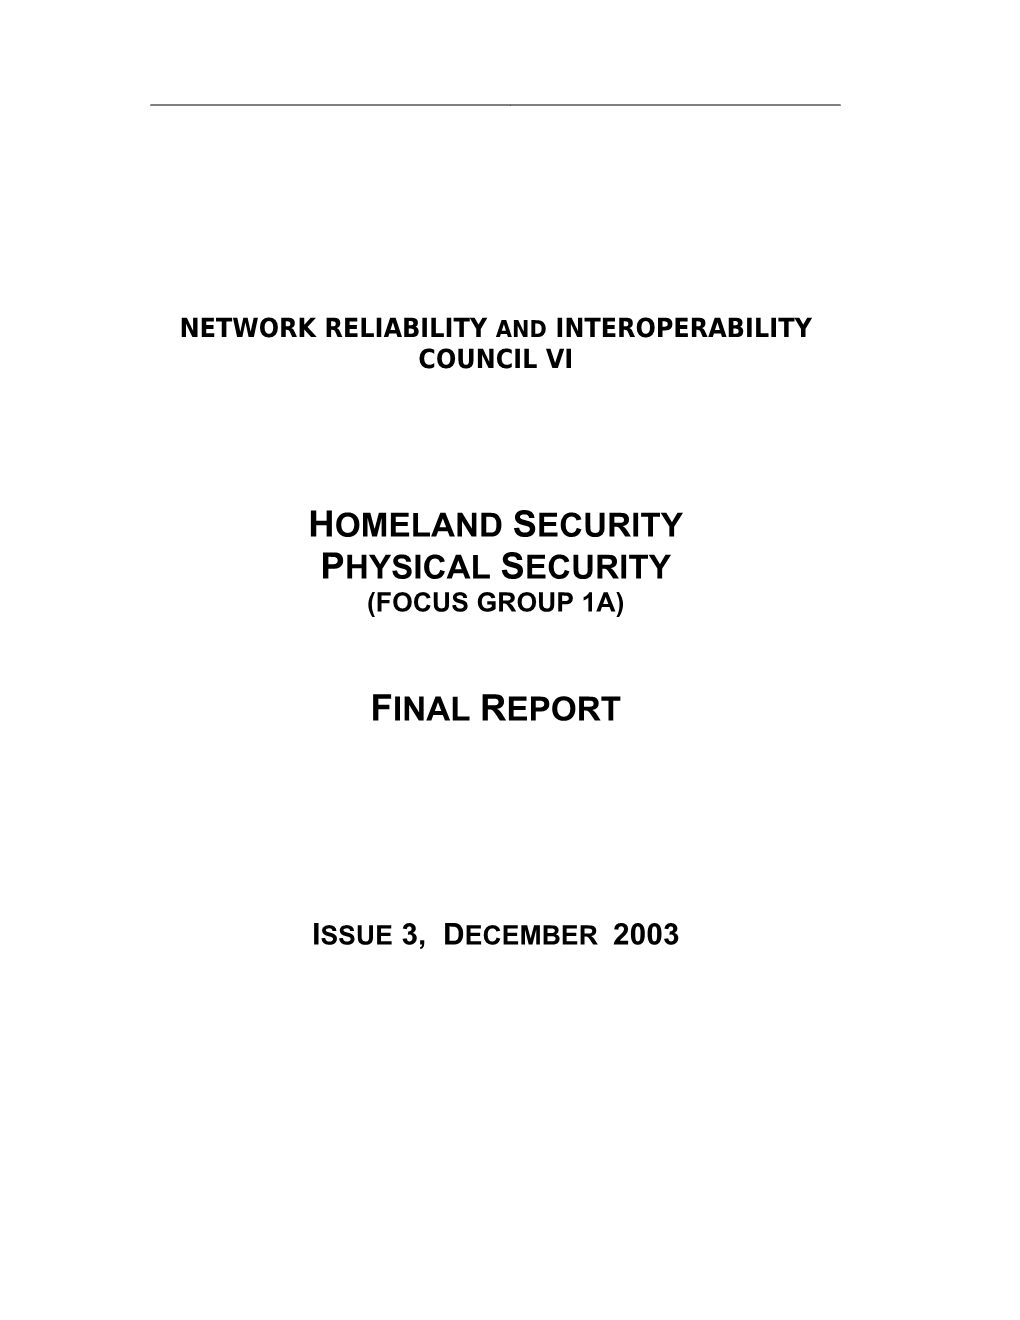 Network Reliability and Interoperability Council Vihomeland Security